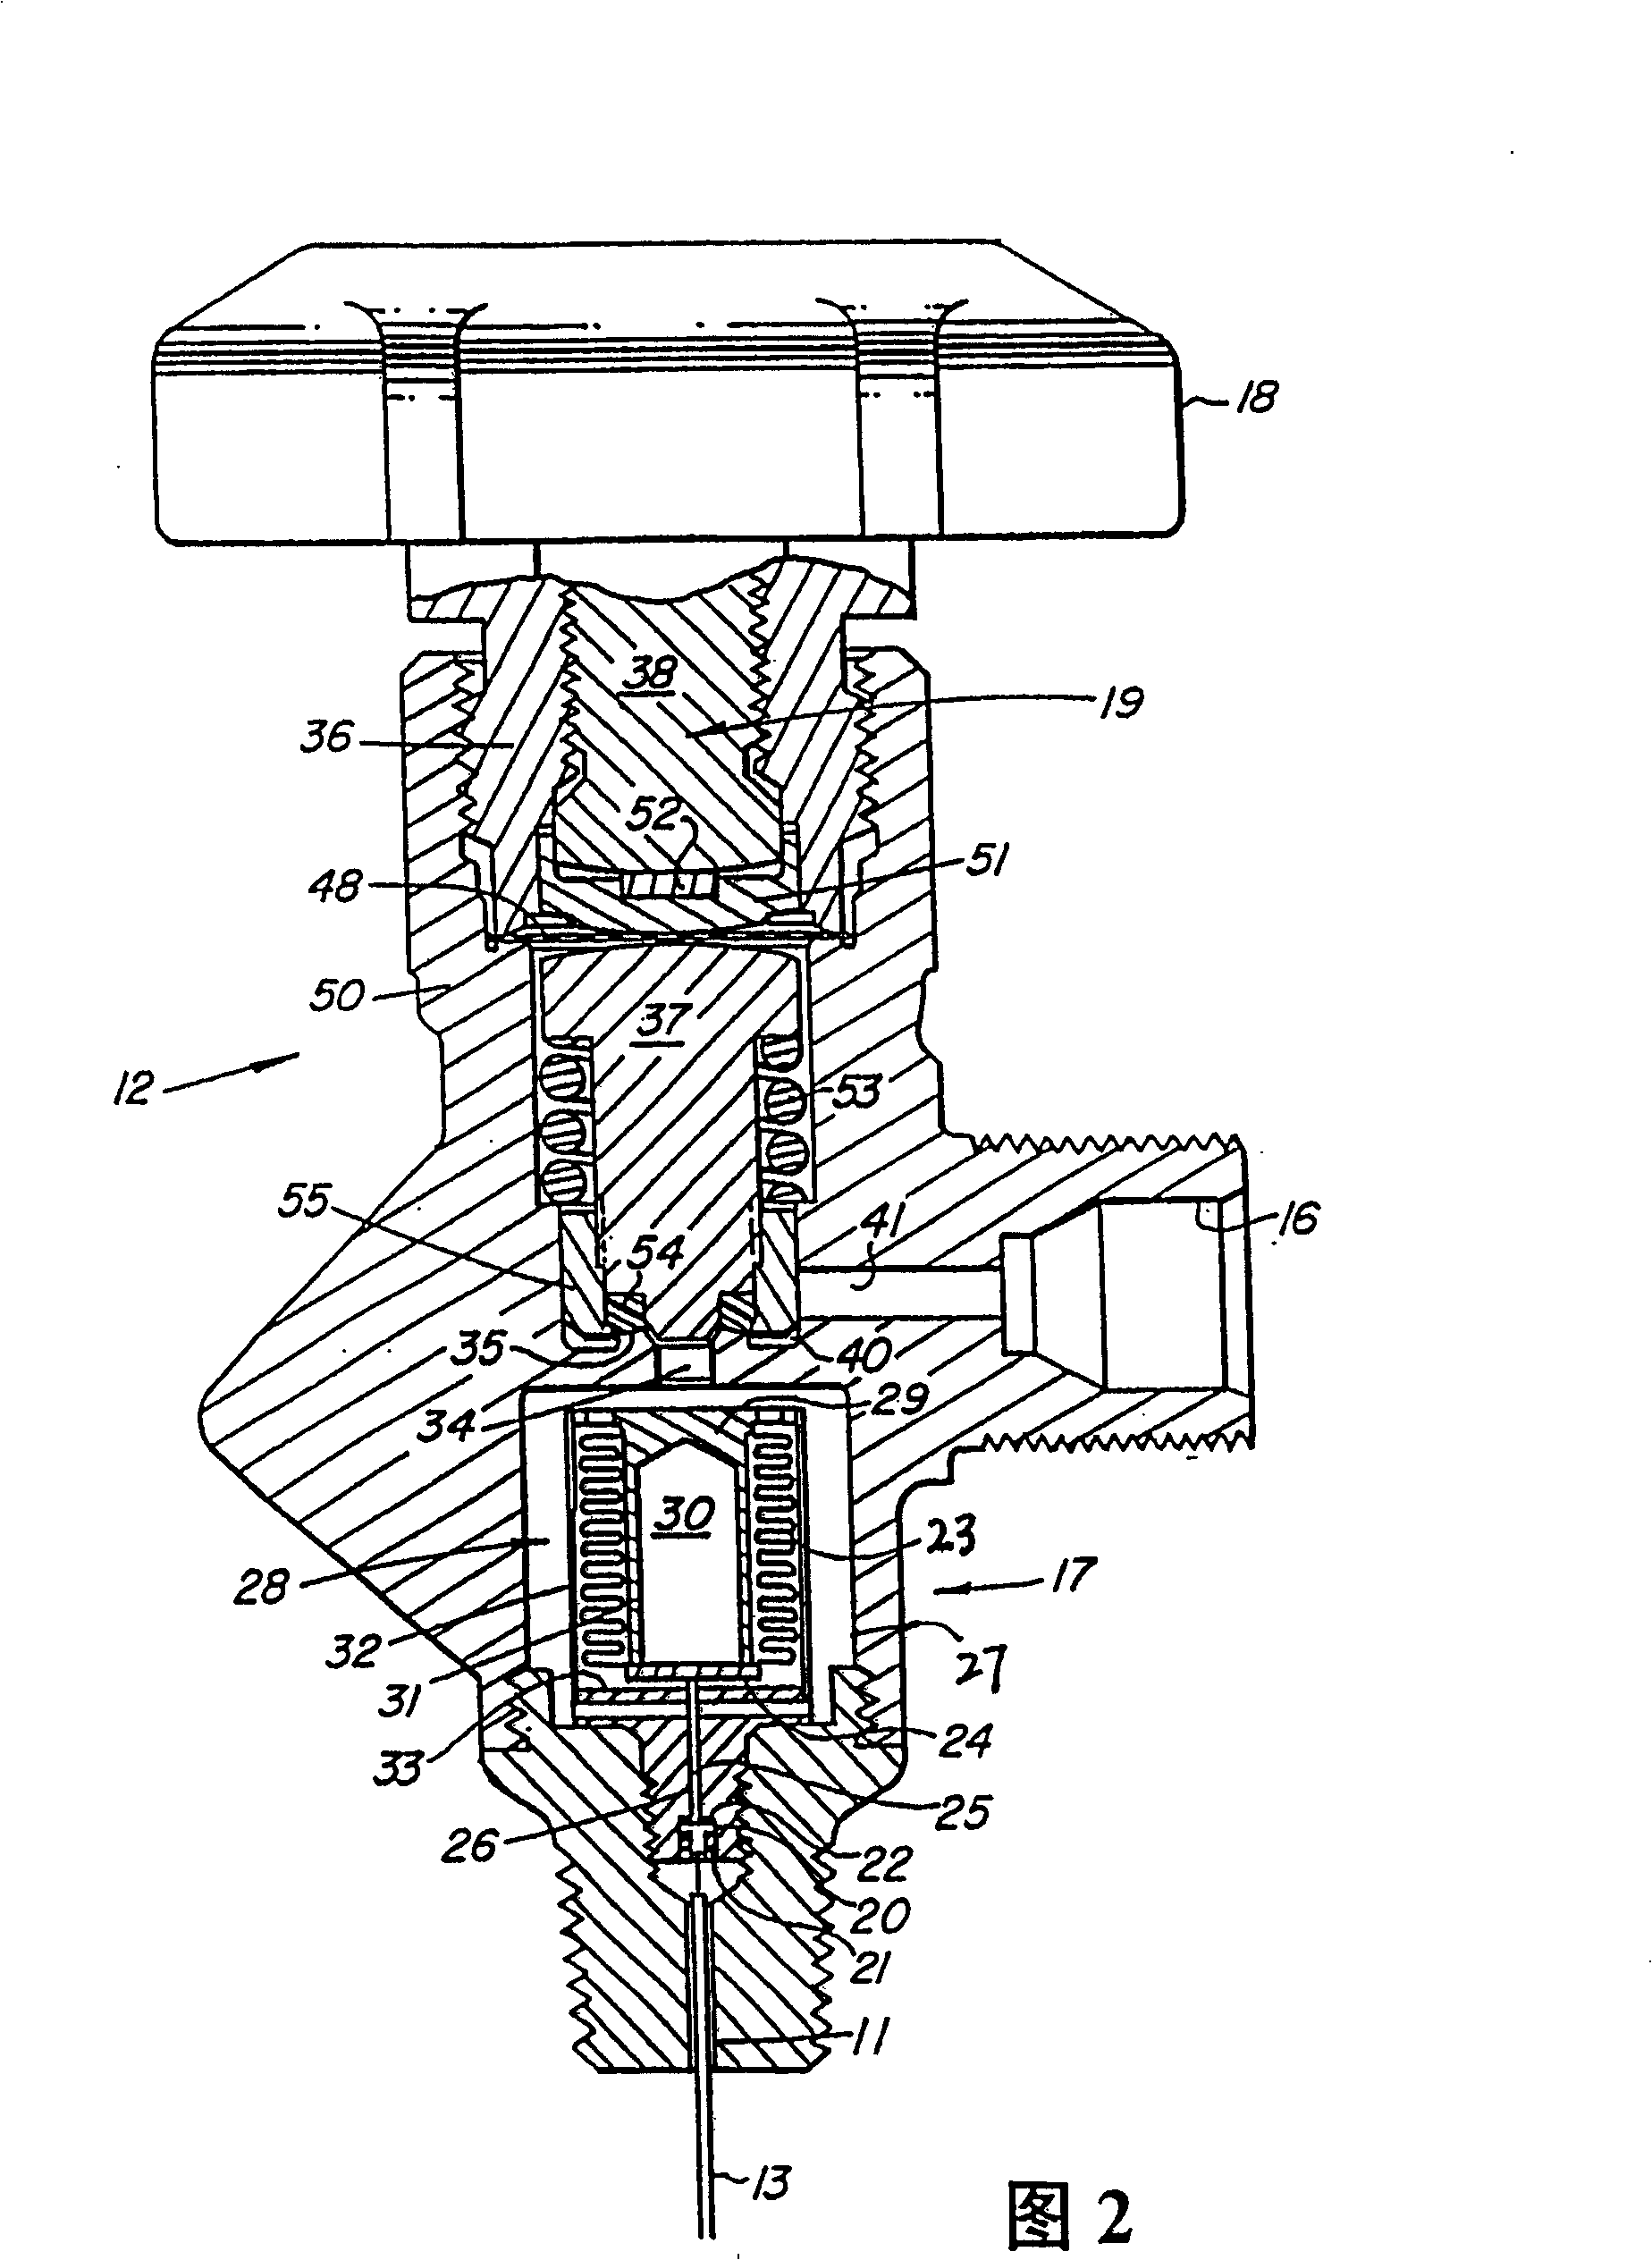 Failure protection discharge valve for pressure vessel